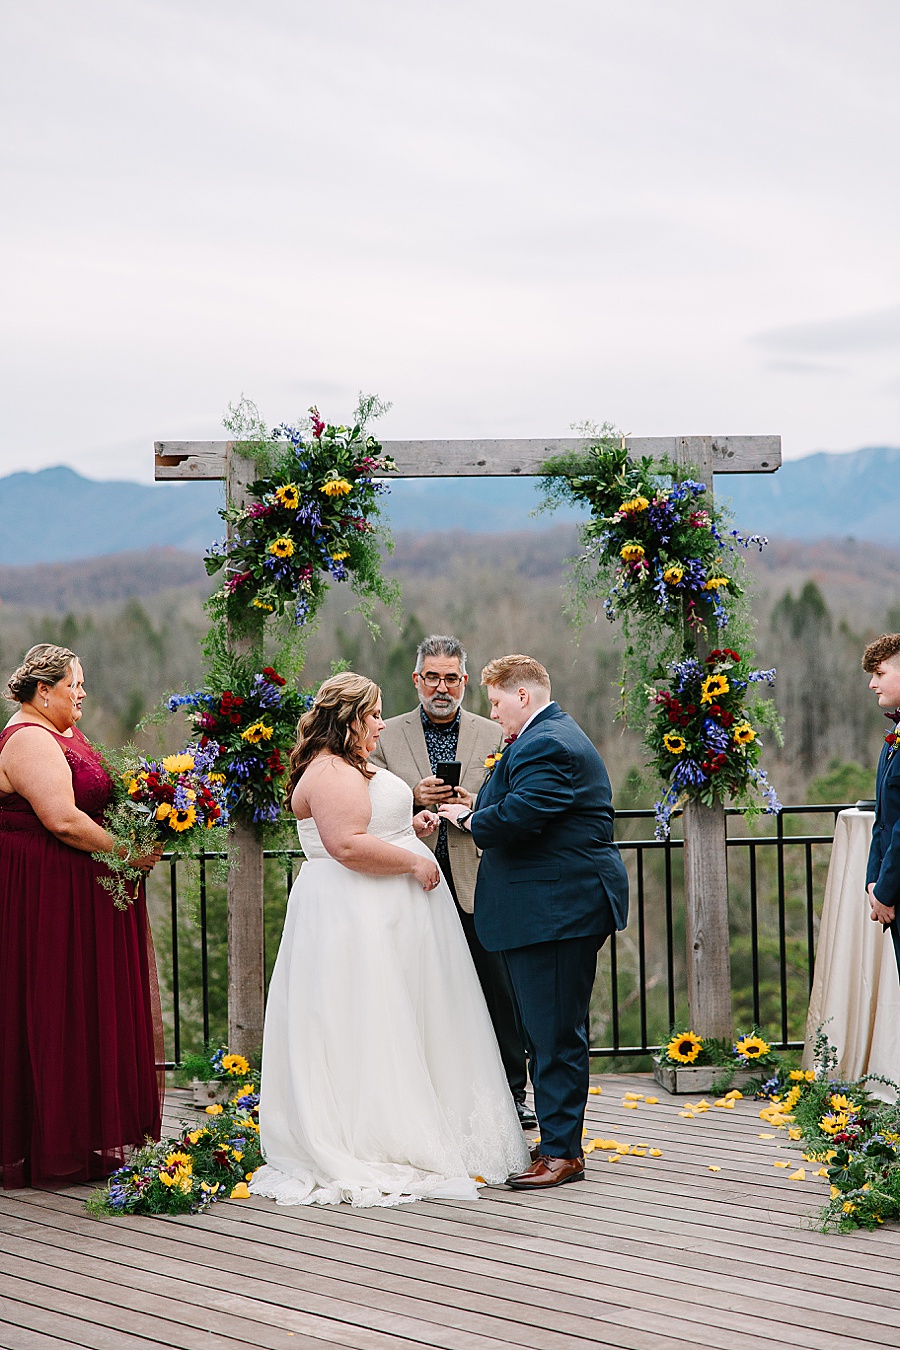 exchanging of rings at alter during wedding at Venue at Greenbrier Estate by Mandy Hart Photo Knoxville Wedding photographer